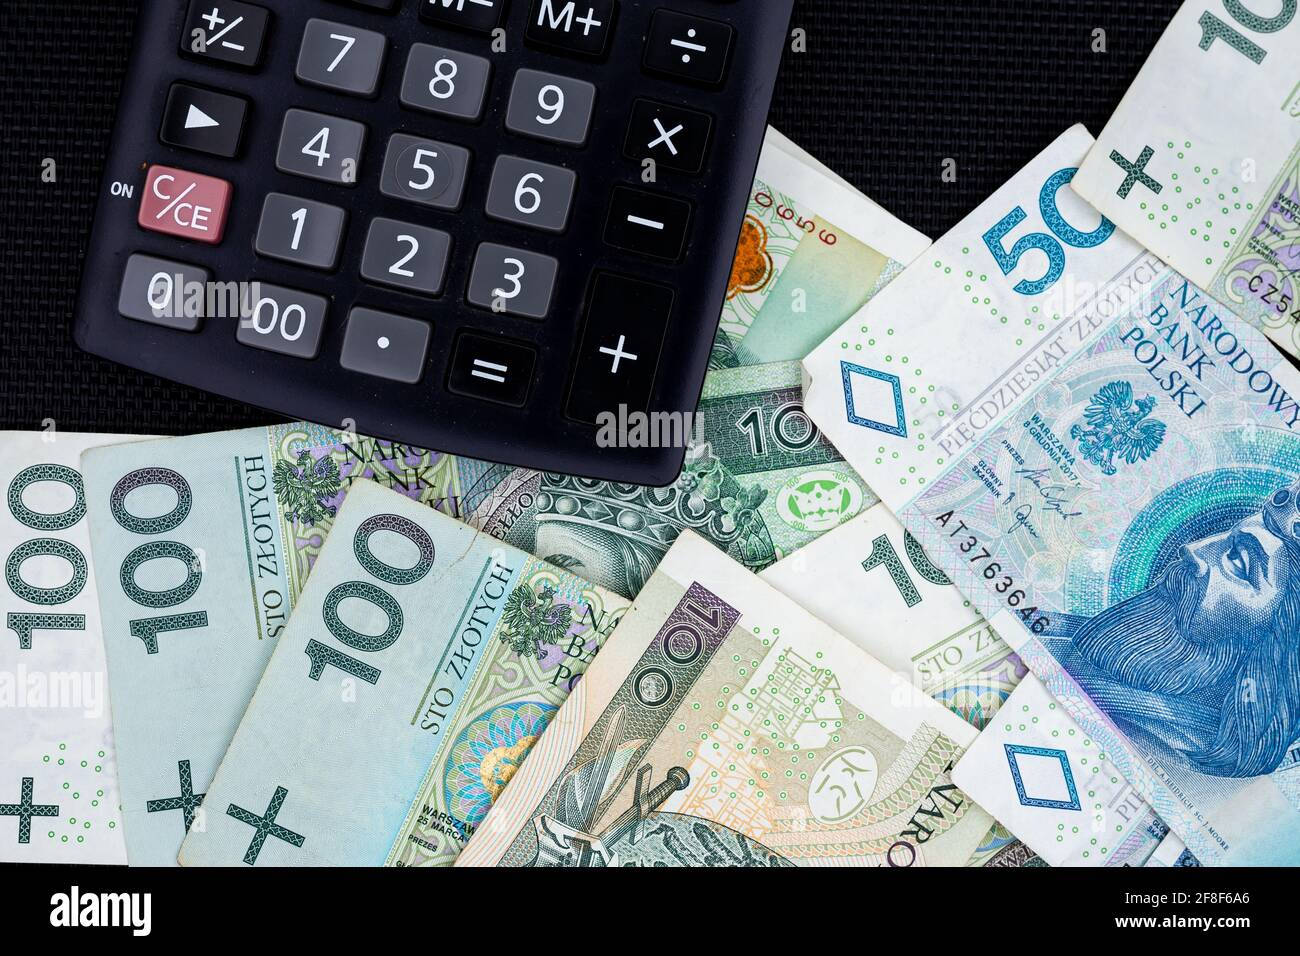 Calculator and Polish banknotes of PLN 100 and PLN 50 on a black  background. Photo taken under soft artificial light Stock Photo - Alamy